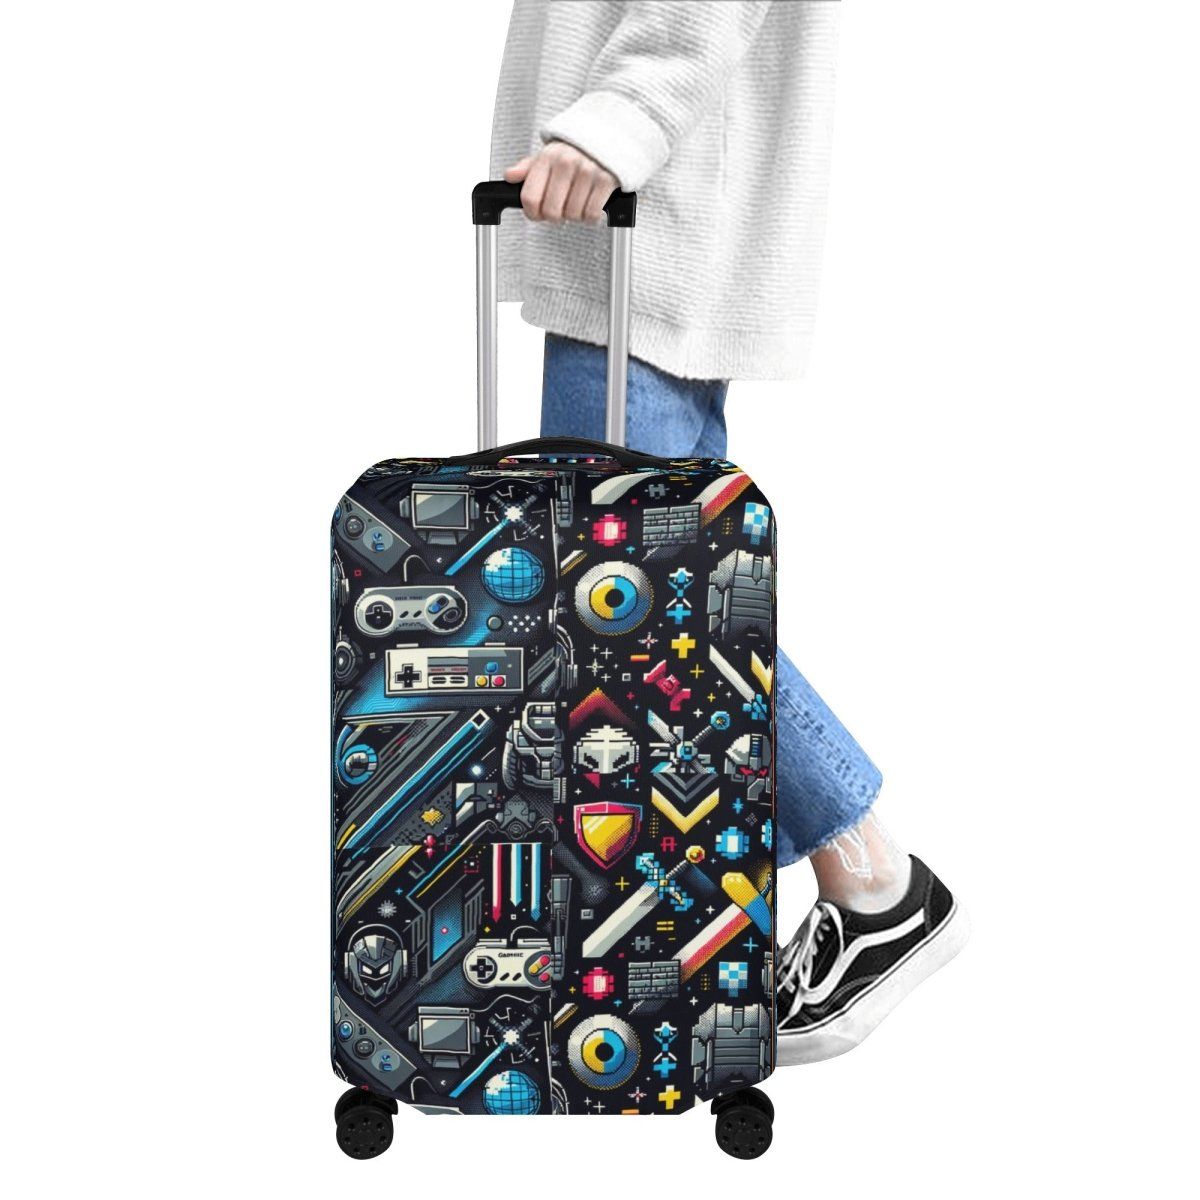 Retro Gaming Luggage CoverRetro Gaming Luggage Cover - Protect Your Suitcase and Show off Your Love for Classic Games - Iron Phoenix GHG